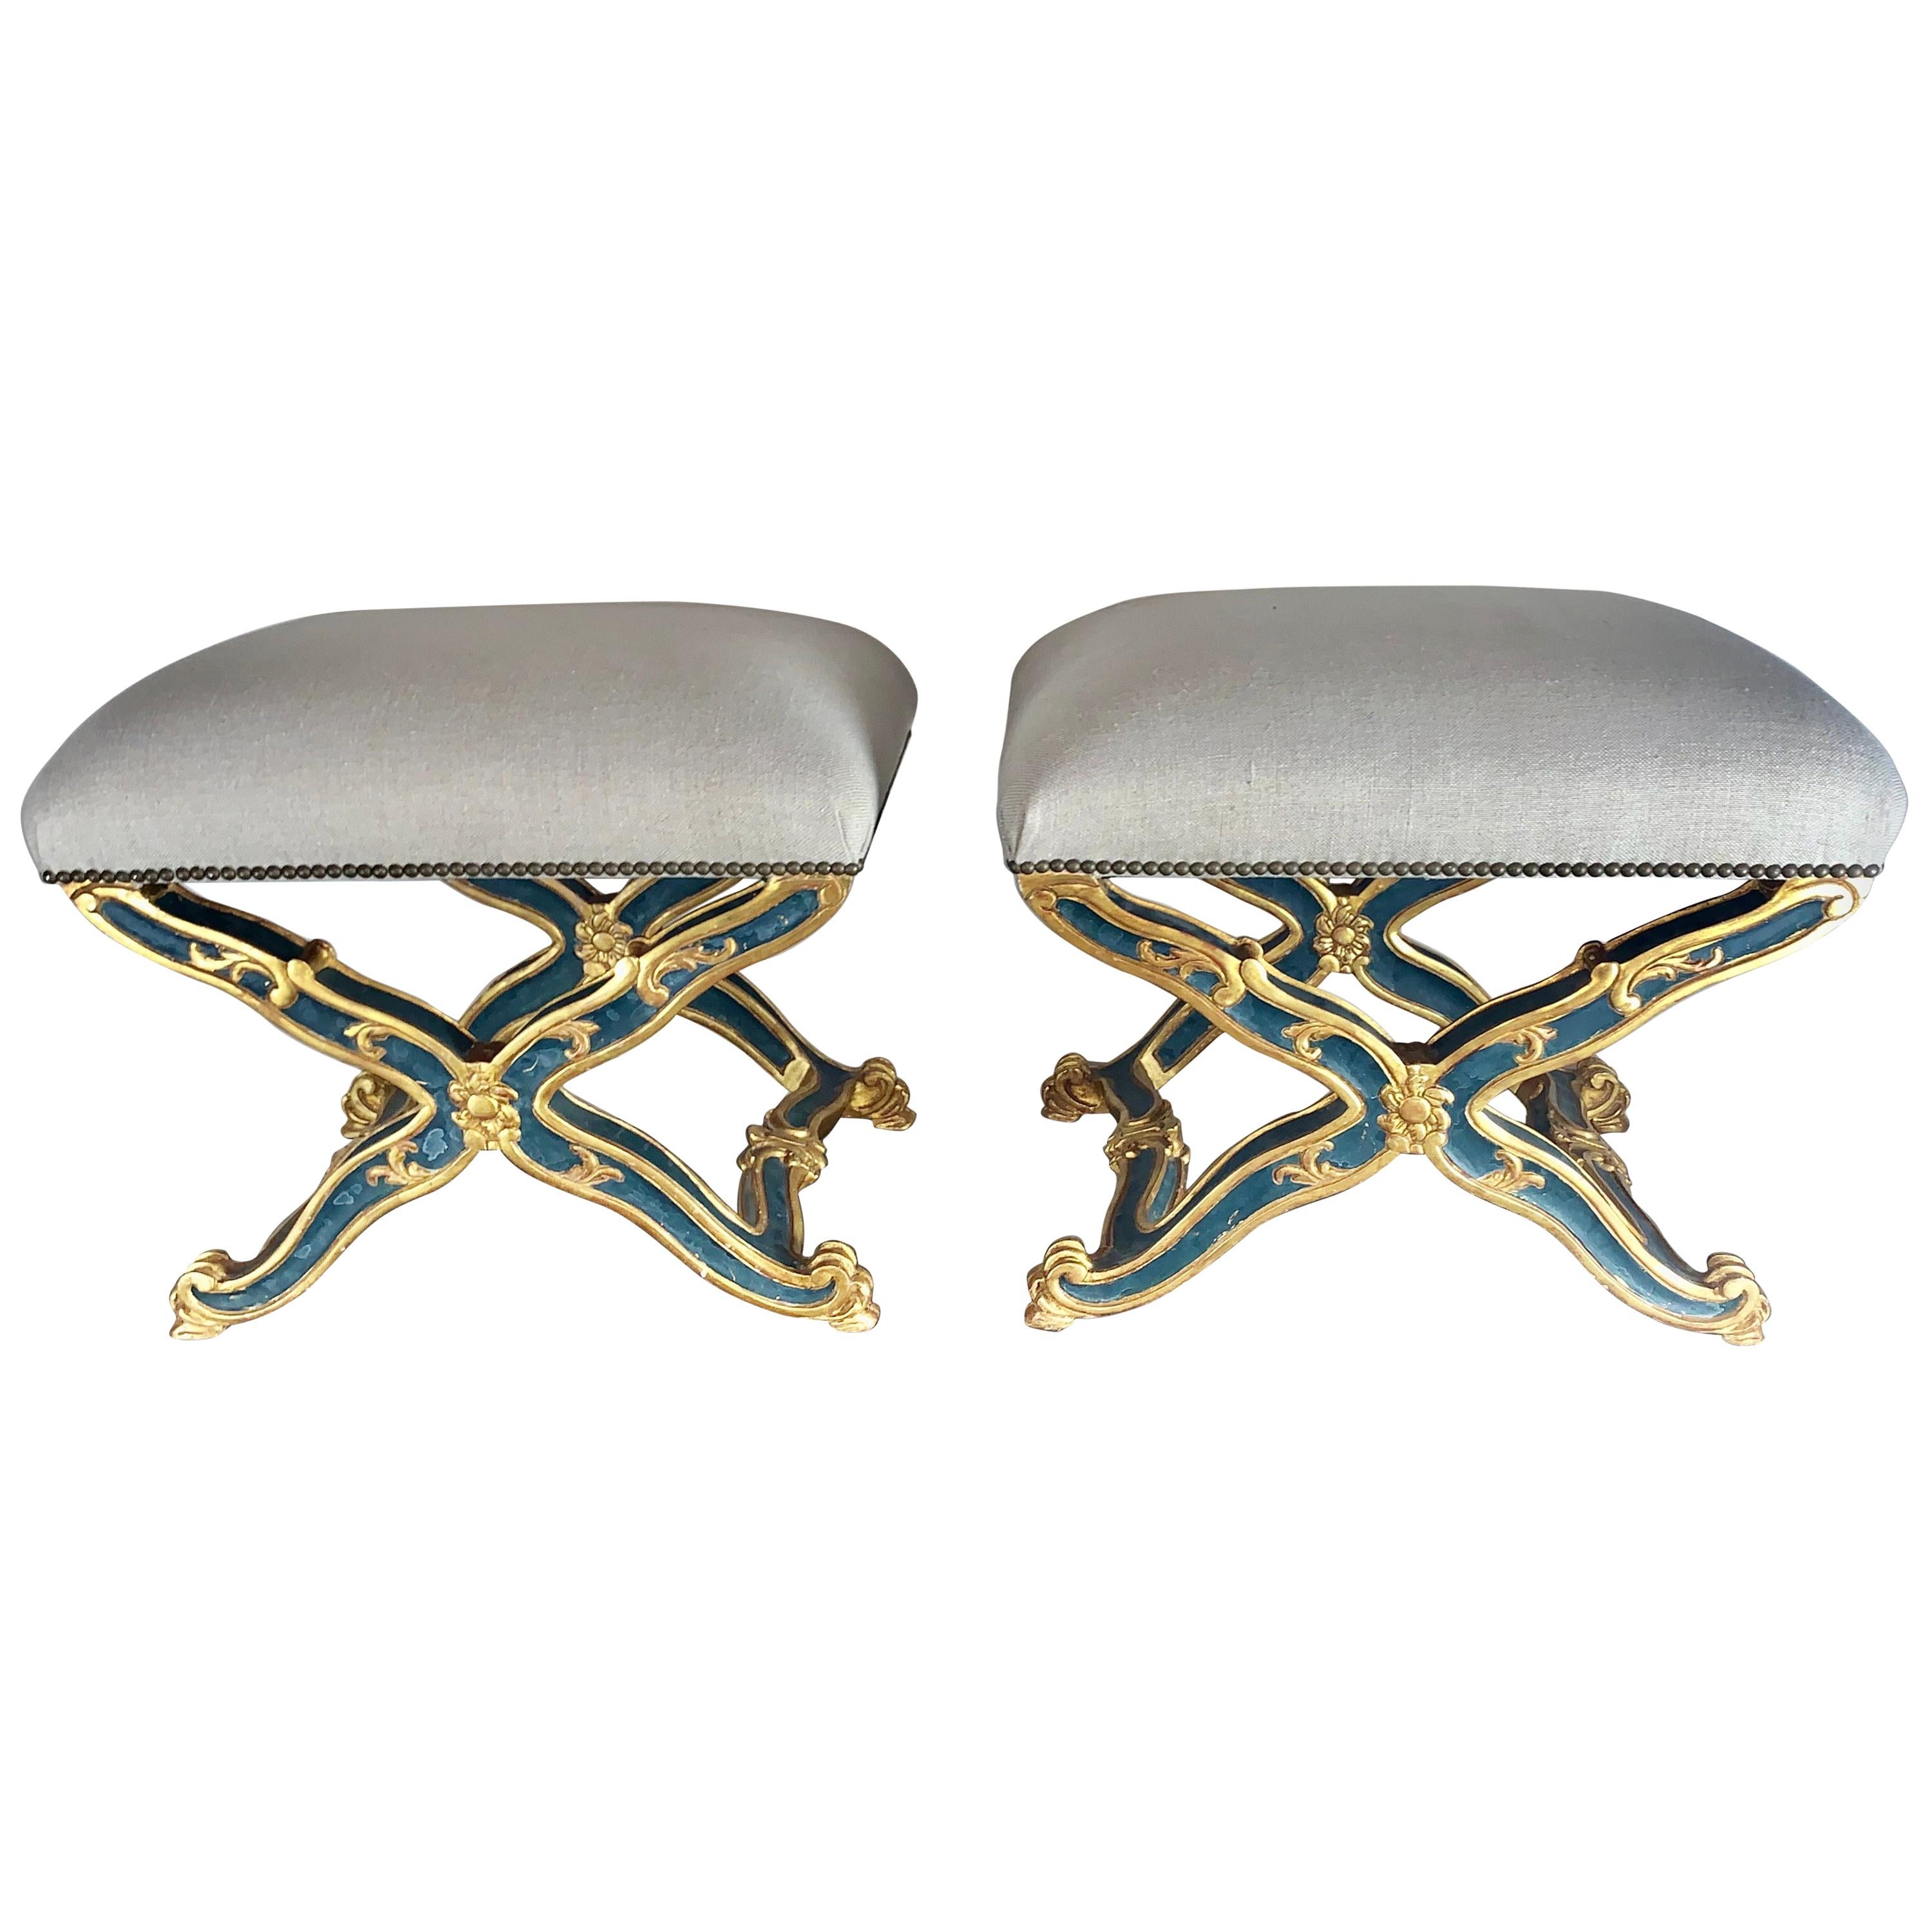 Pair of French Painted and Parcel-Gilt Benches, circa 1900s